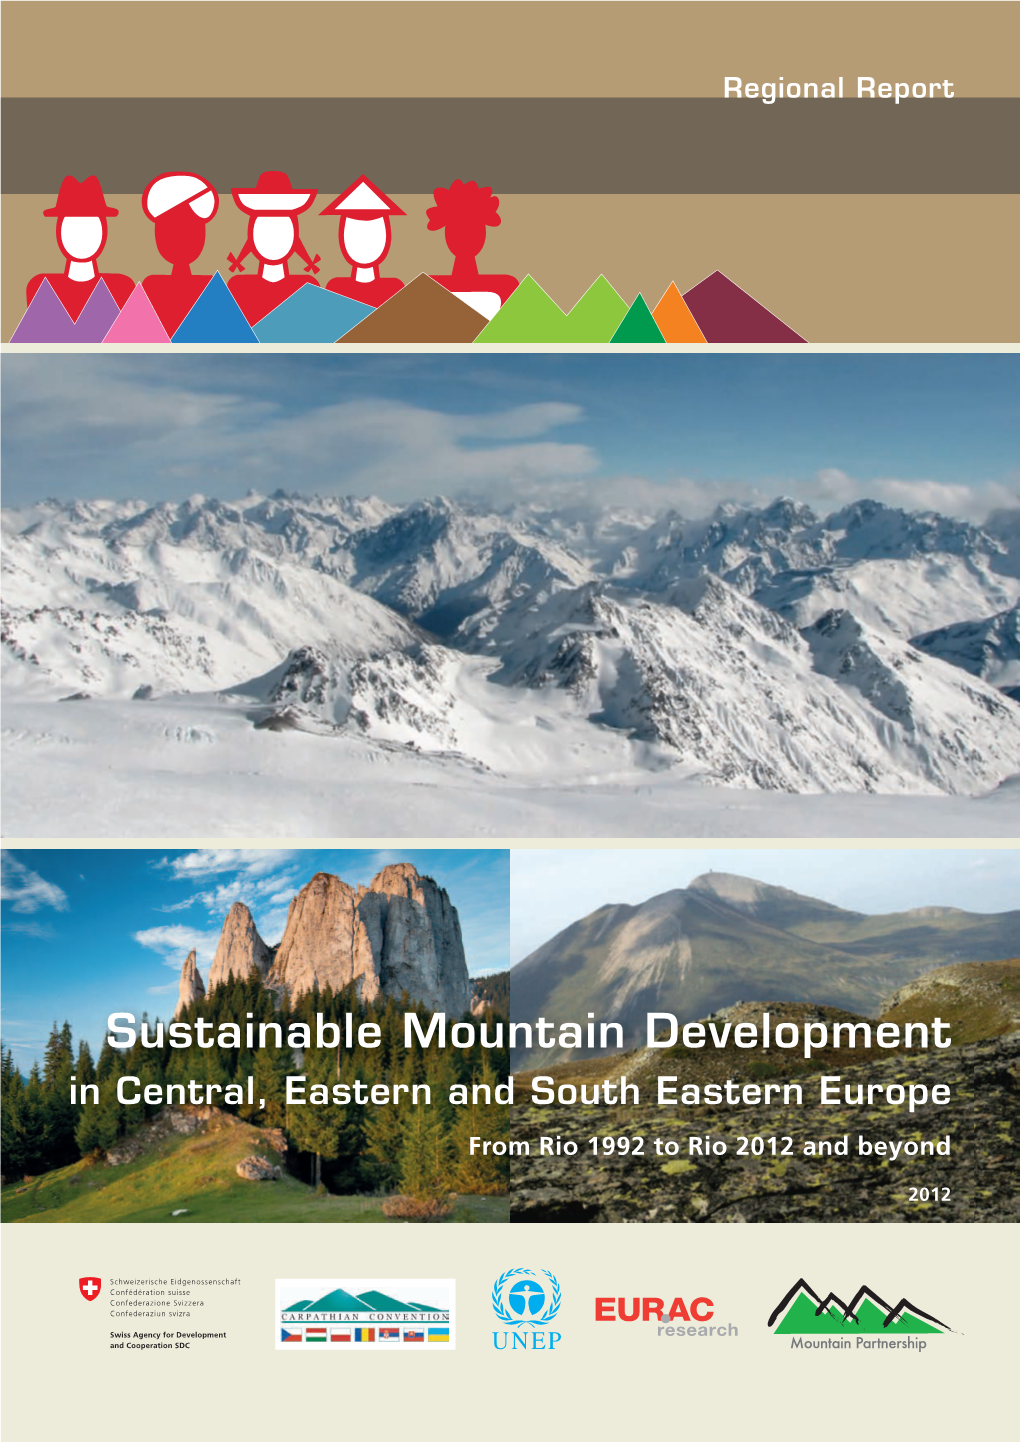 Sustainable Mountain Development in Central, Eastern and South Eastern Europe from Rio 1992 to Rio 2012 and Beyond 2012 2012